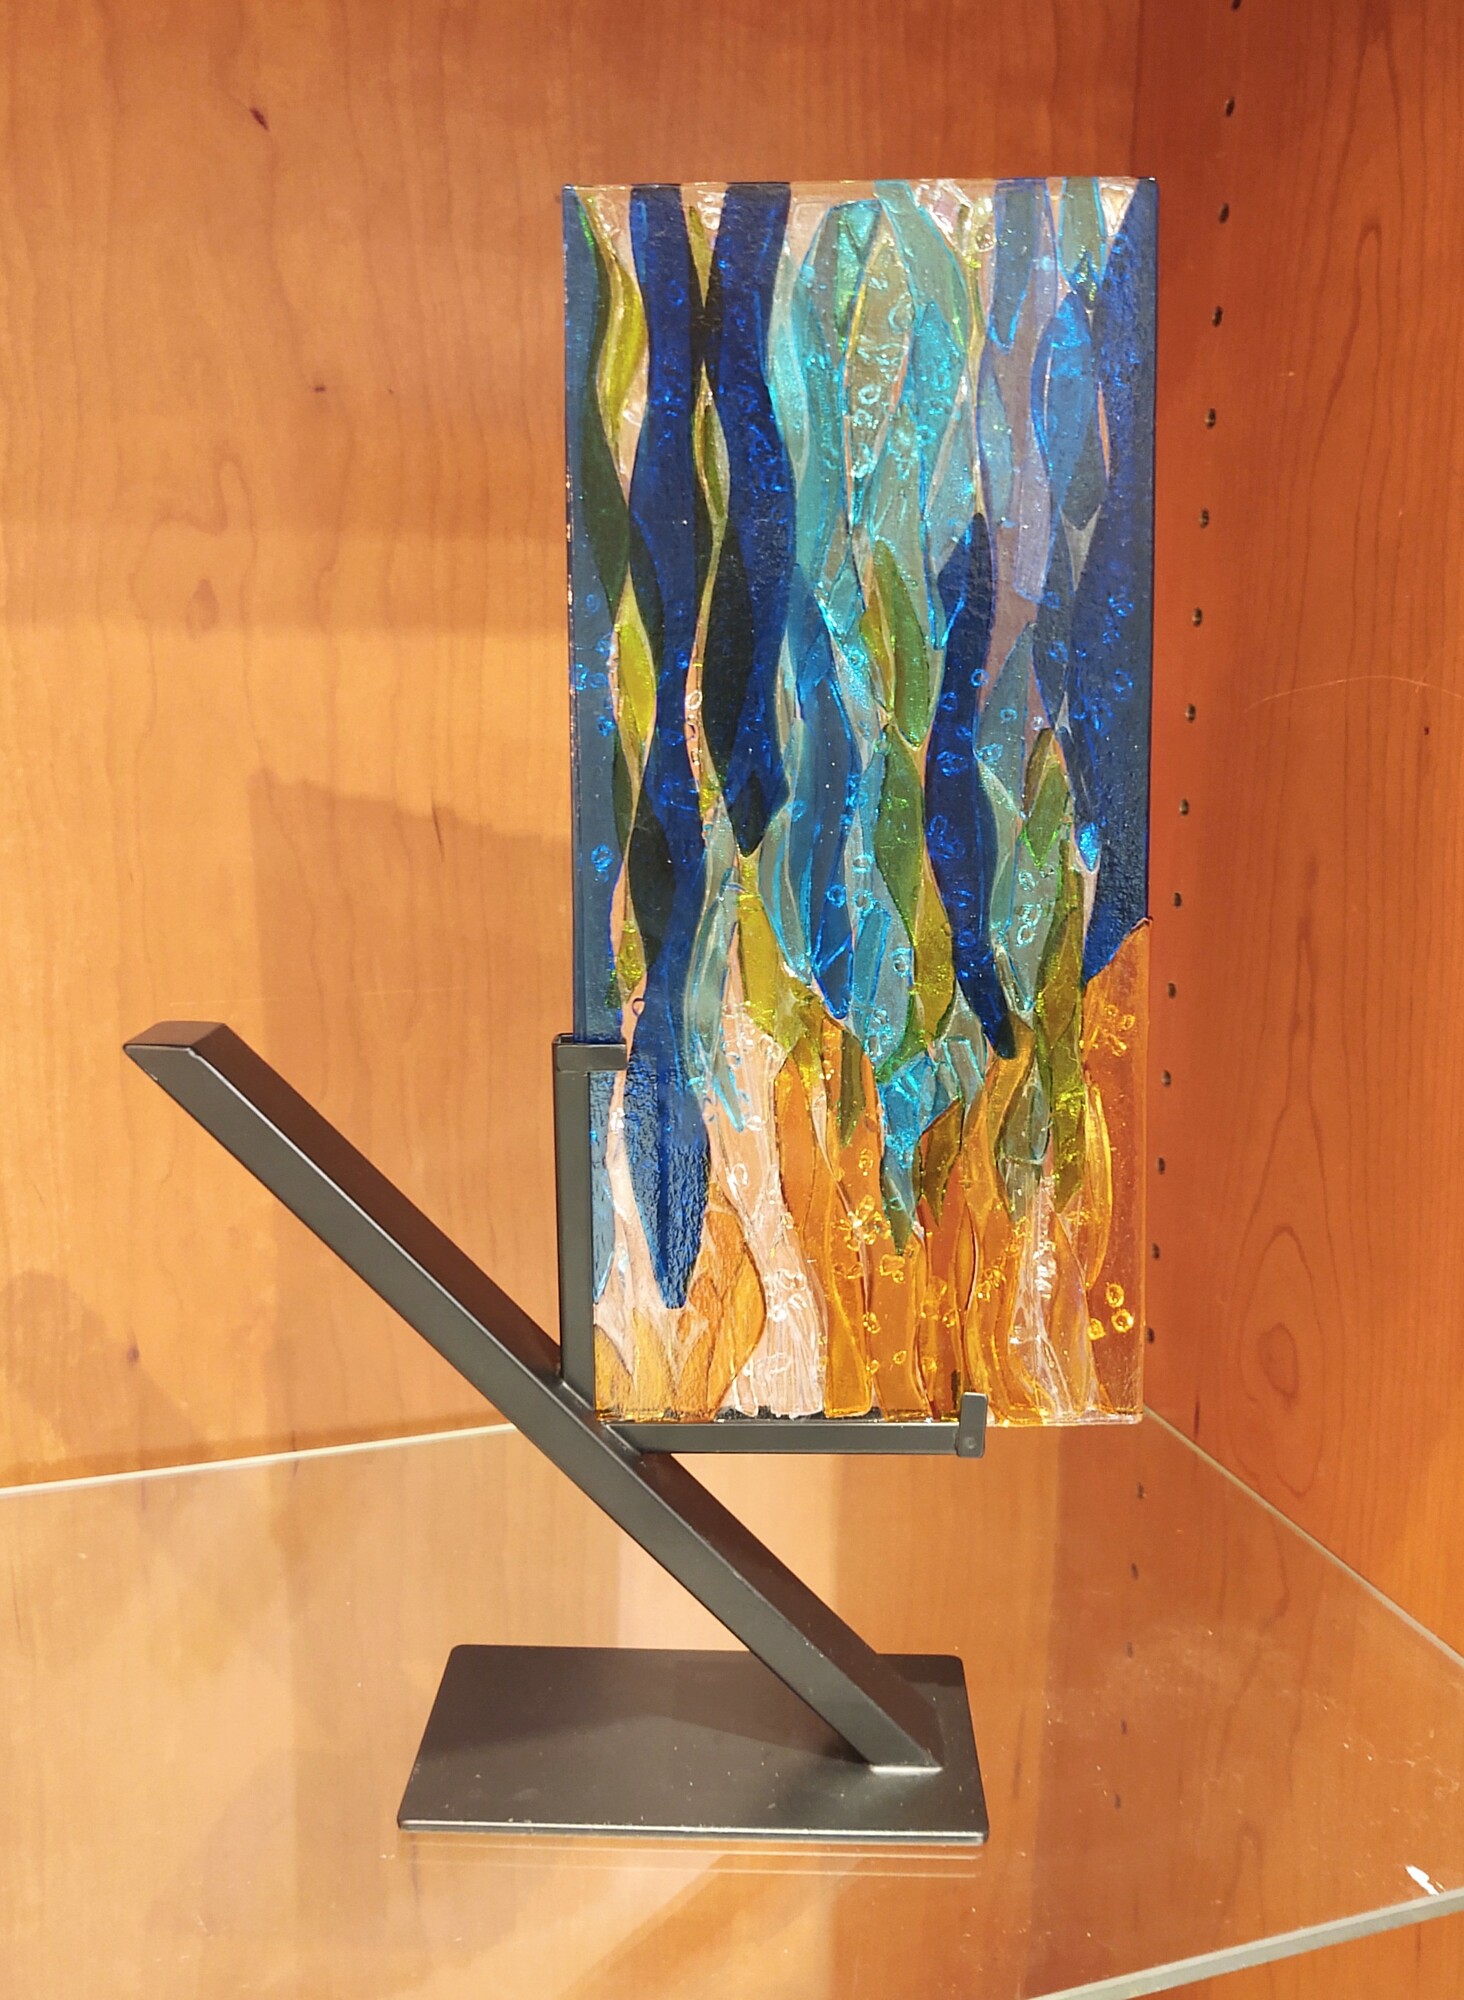 Fused Glass Art Designs
Fused Glass Waterfall and Stand
Glass 5.5x11.5
With Stand 15x9.5